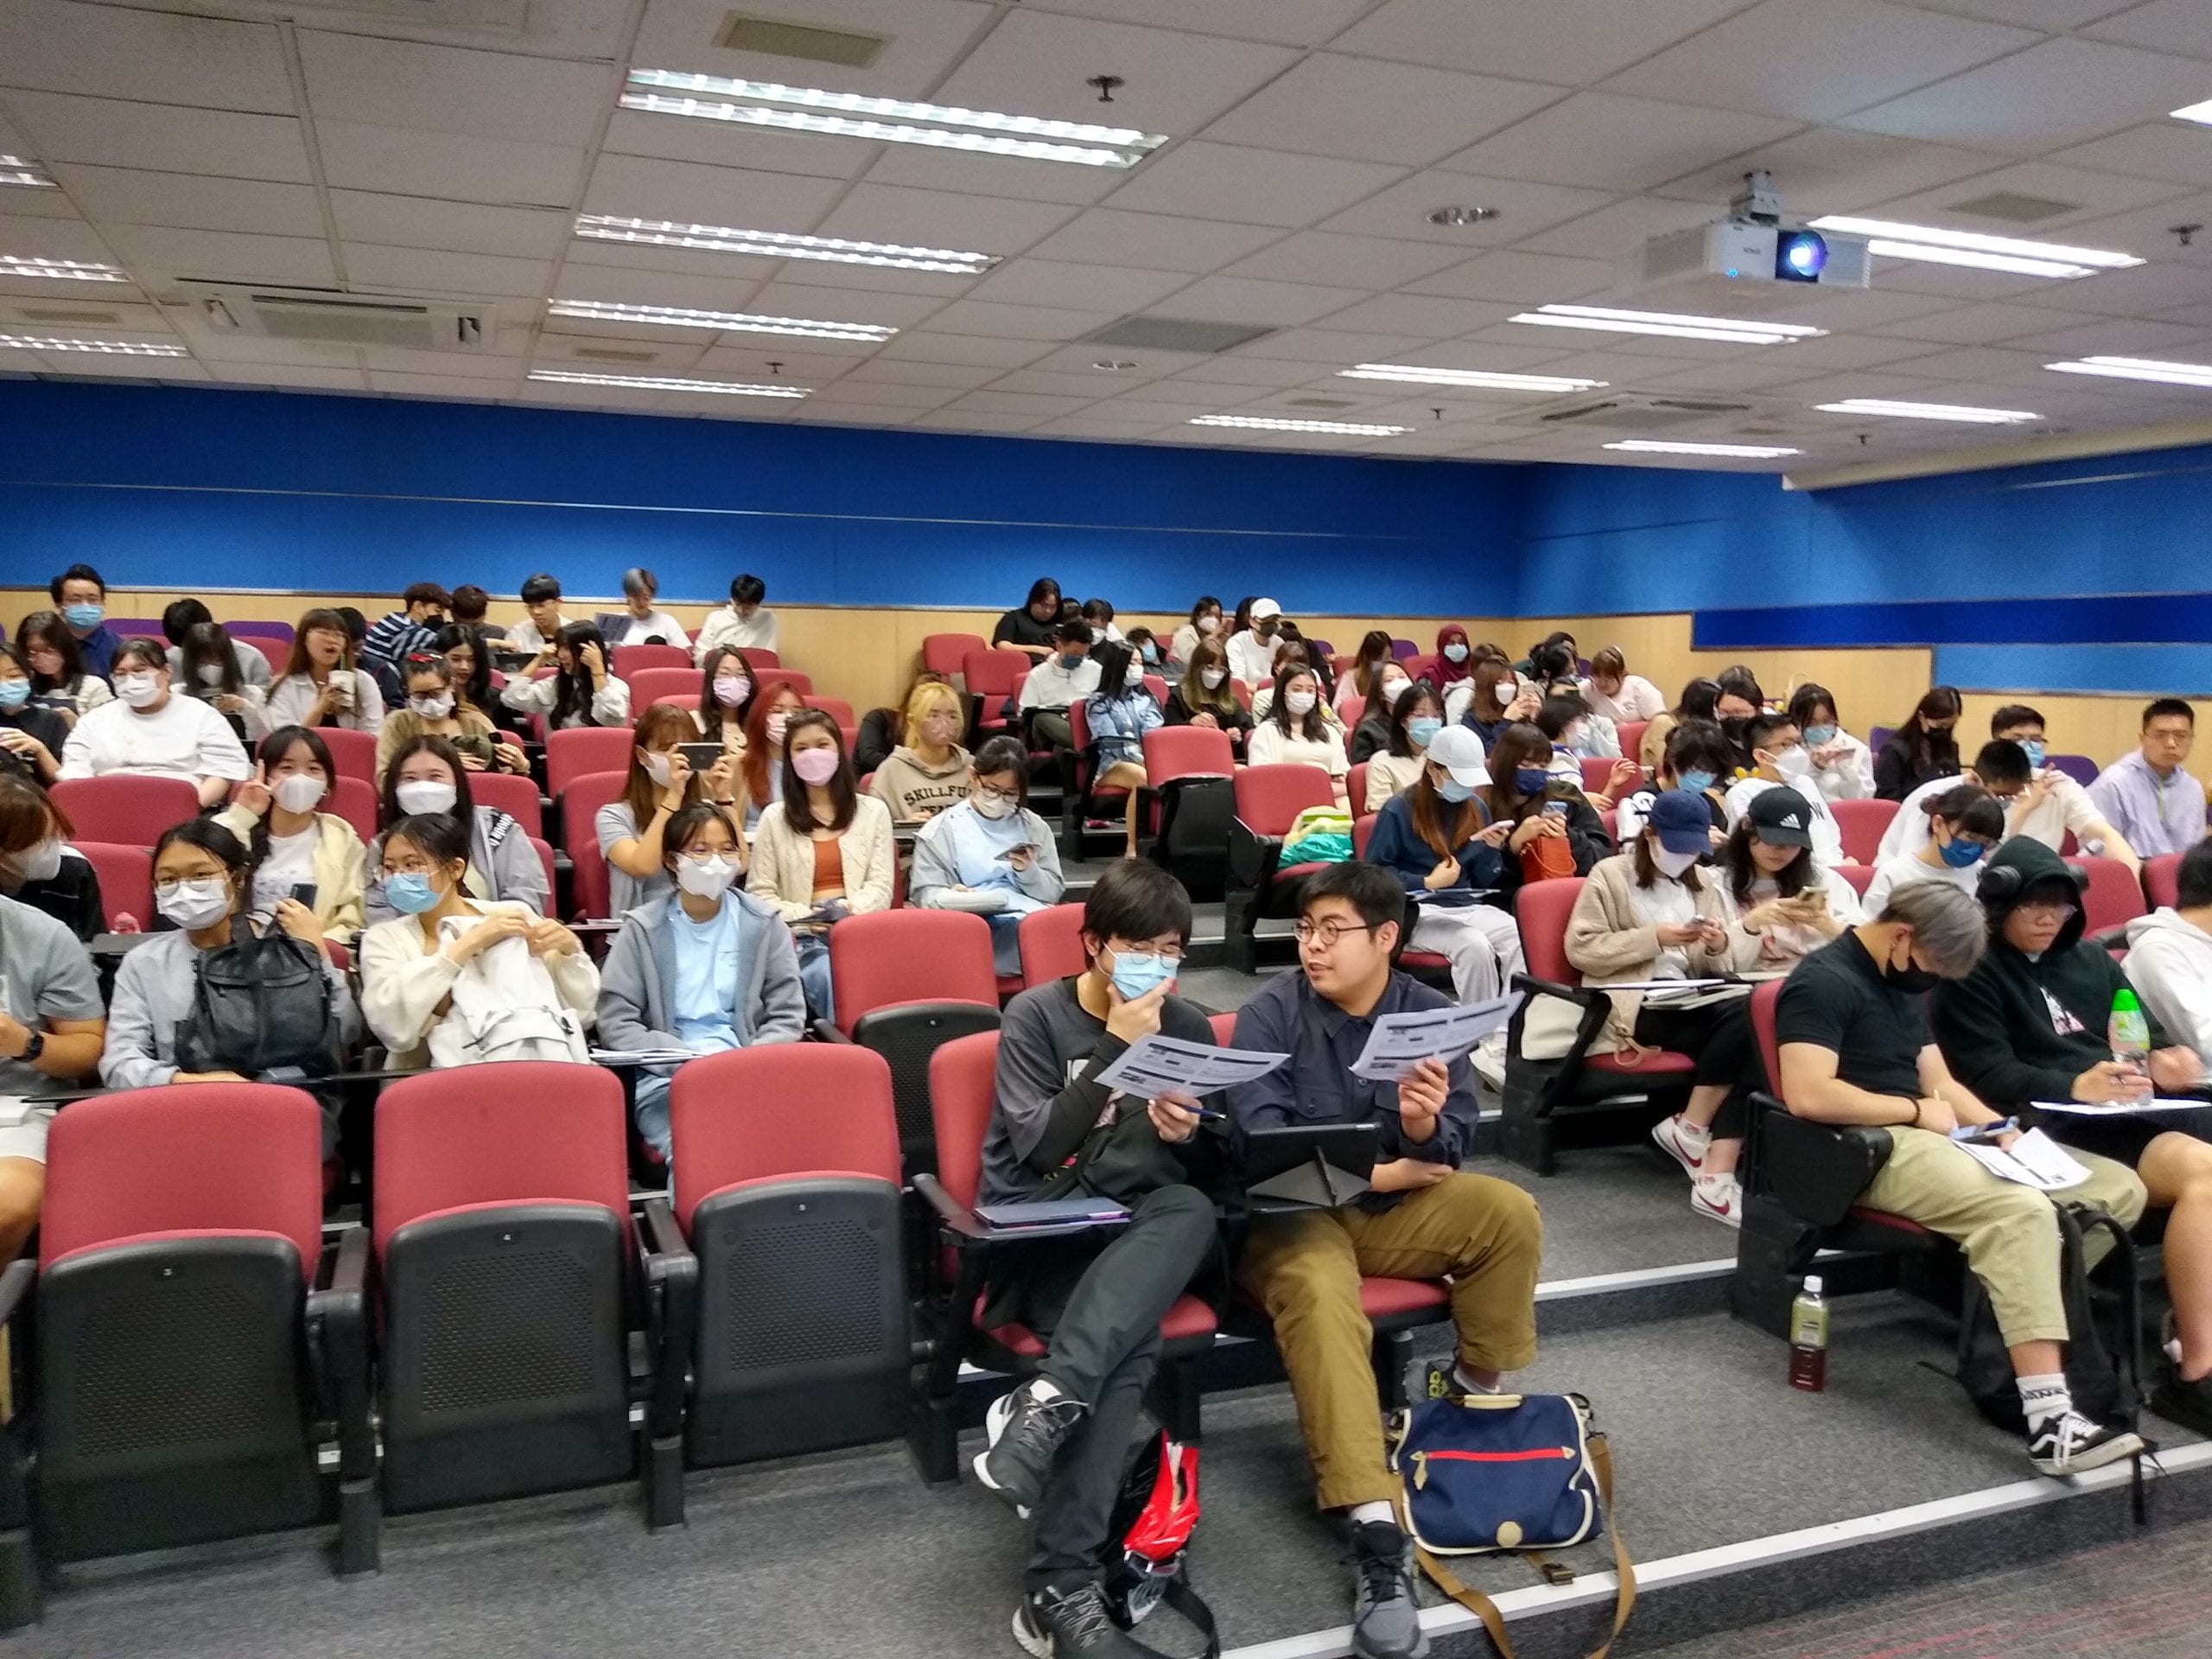 Students sitting in a lecture theatre at VTC